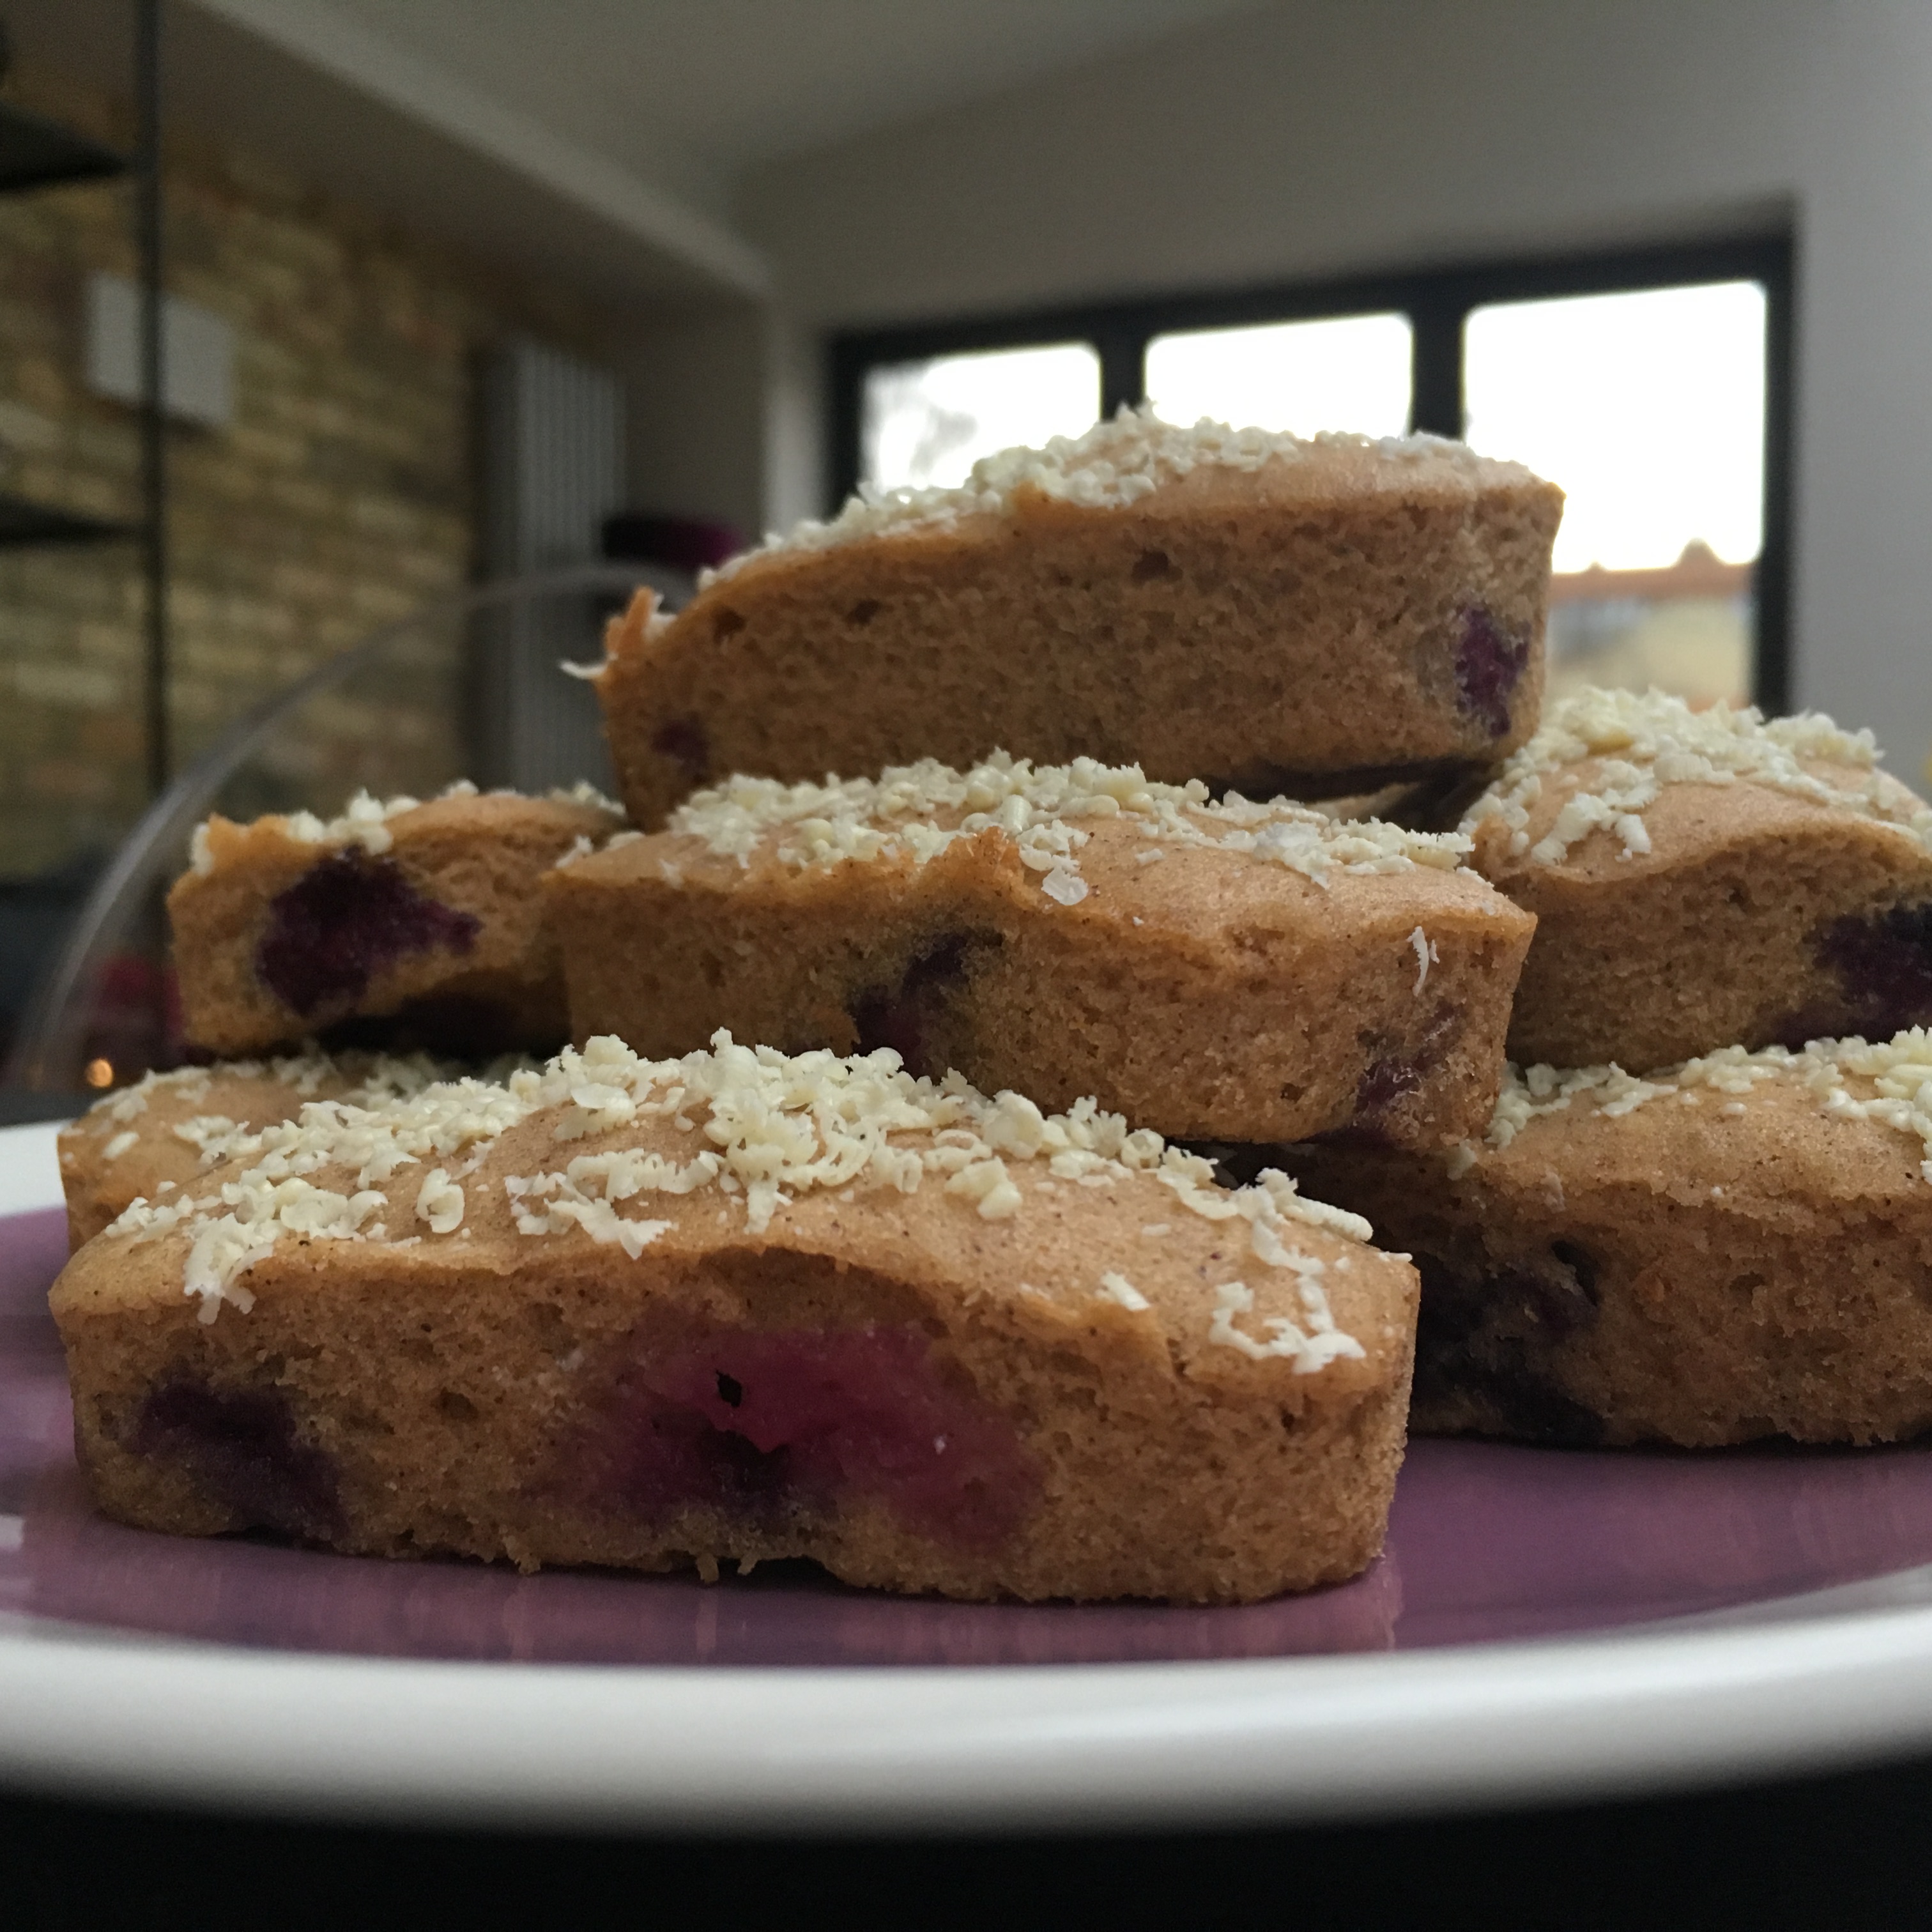 Cinnamon and blueberry cakes